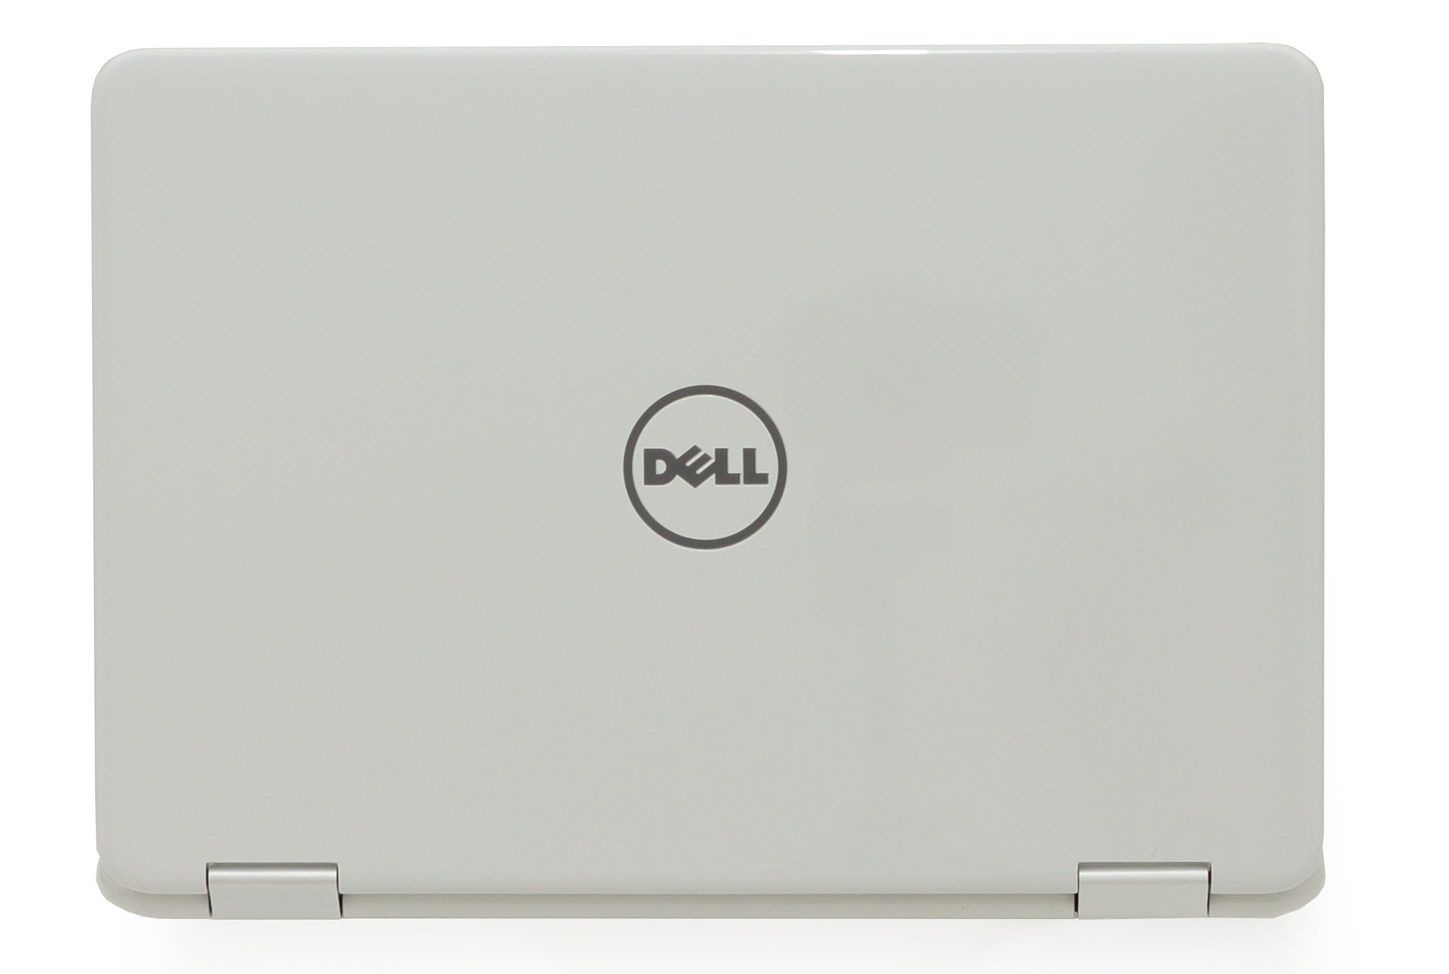 Dell Inspiron 11 3179 review - ultra-budget 2-in-1 - is it worth 